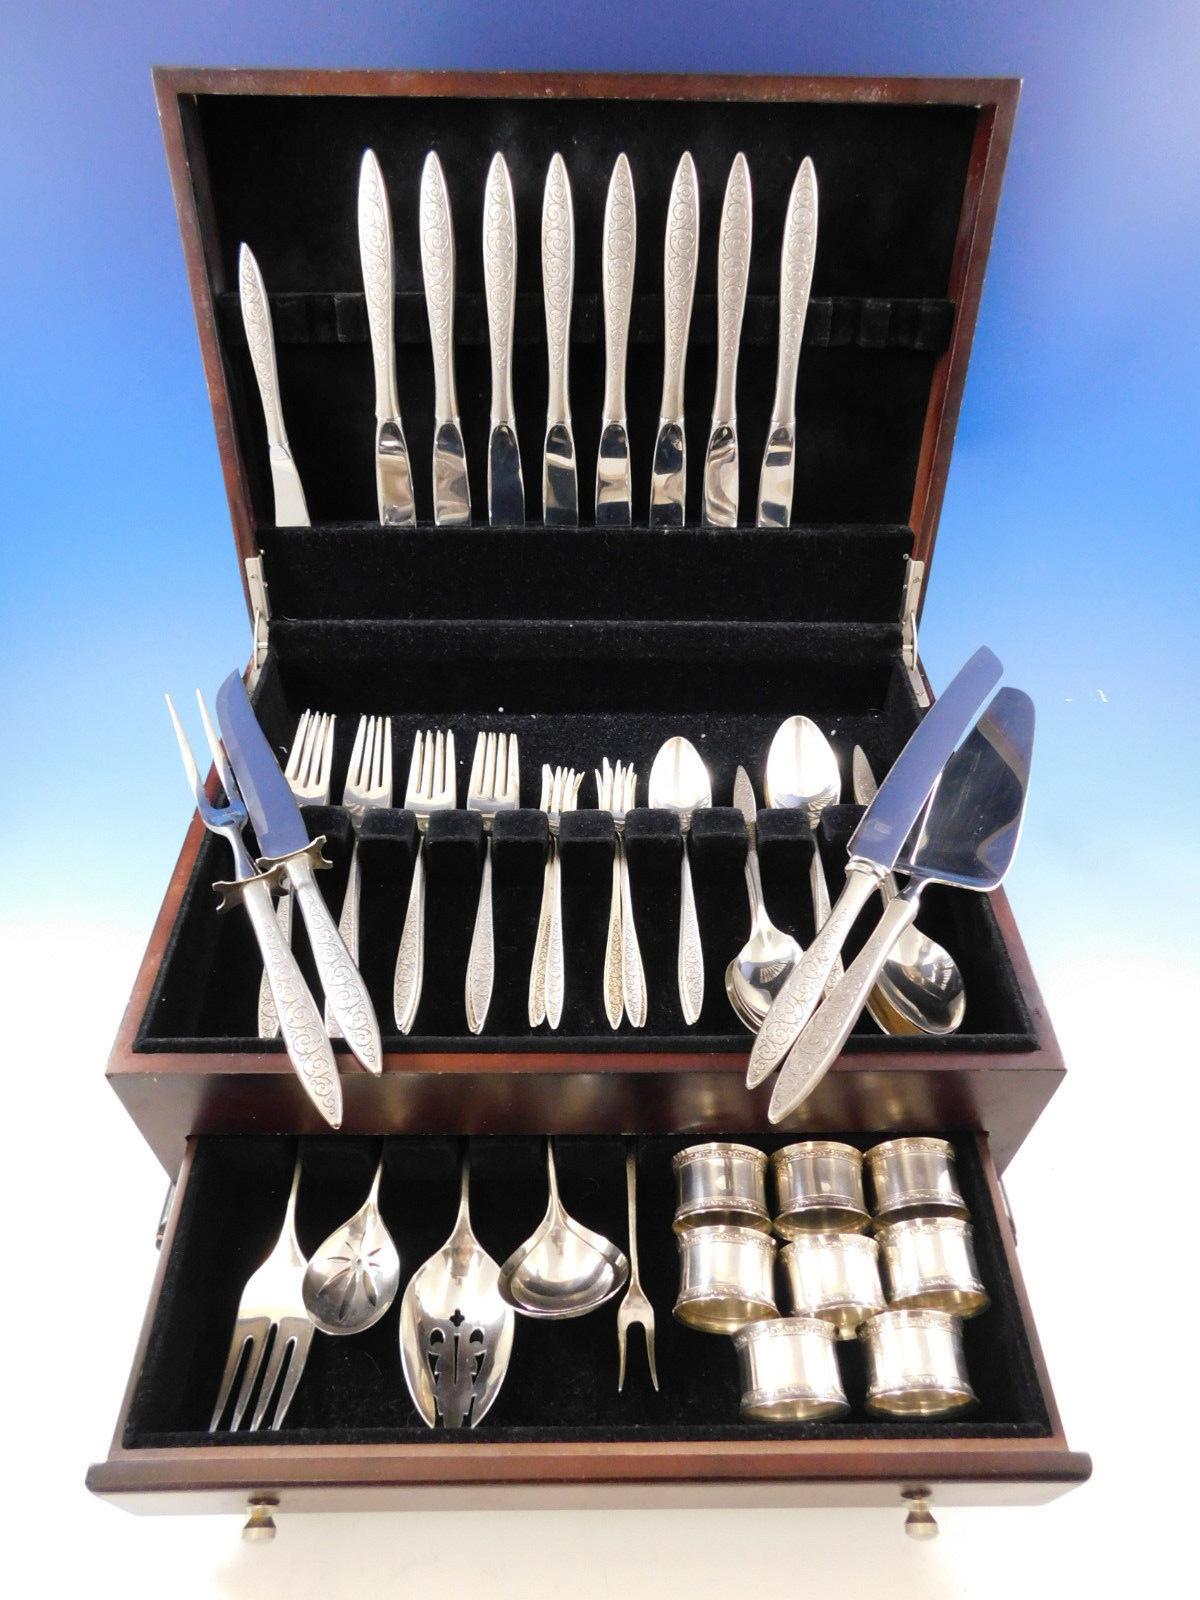 Outstanding Spanish Lace by Wallace Sterling Silver flatware set - 68 pieces. This set includes:

8 knives, 9 1/4